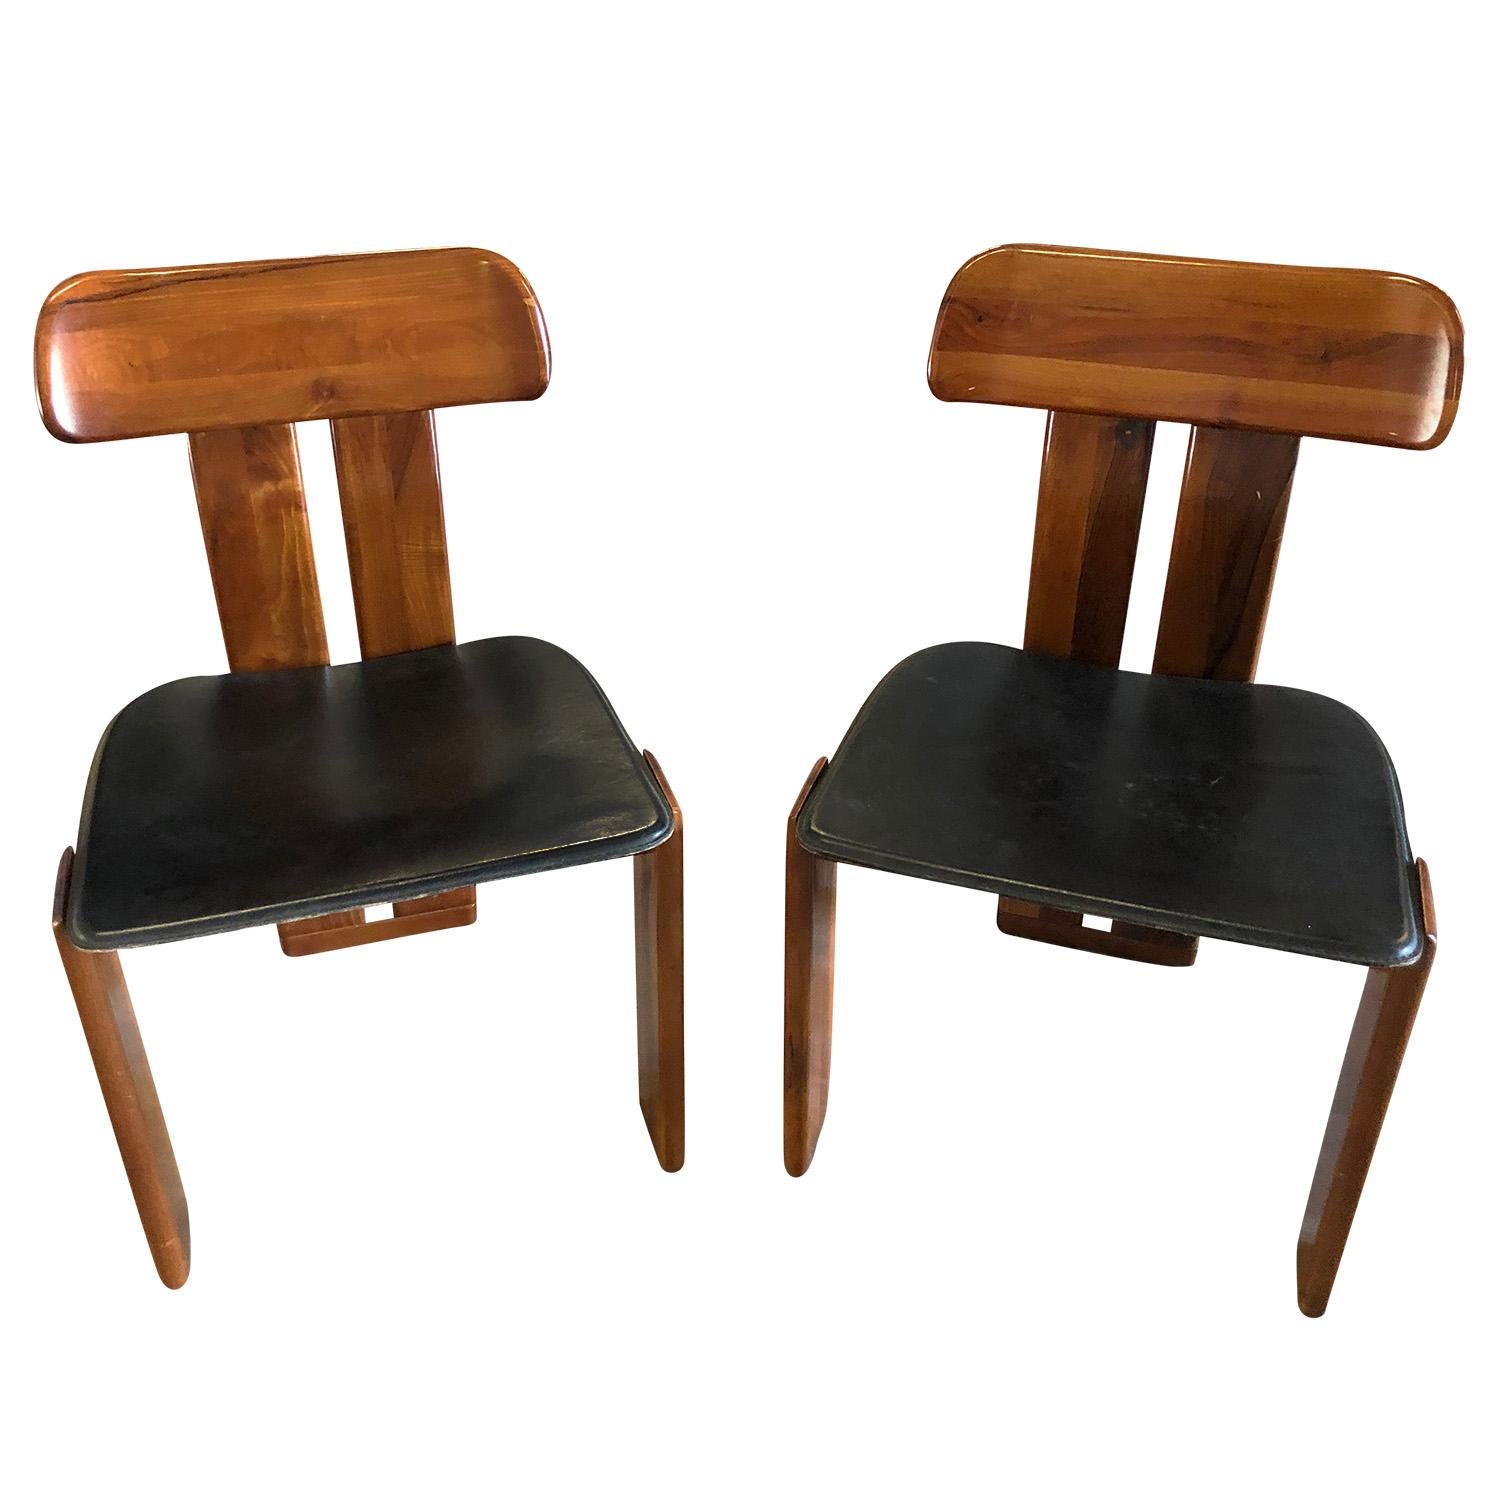 A unique Mid-Century Modern pair of dining chairs made of Rosewood and black leather seats. Designed by Tobia Scarpa in good condition. The side chairs are enhanced by very detailed backrest design, standing on three wide, straight legs. Wear